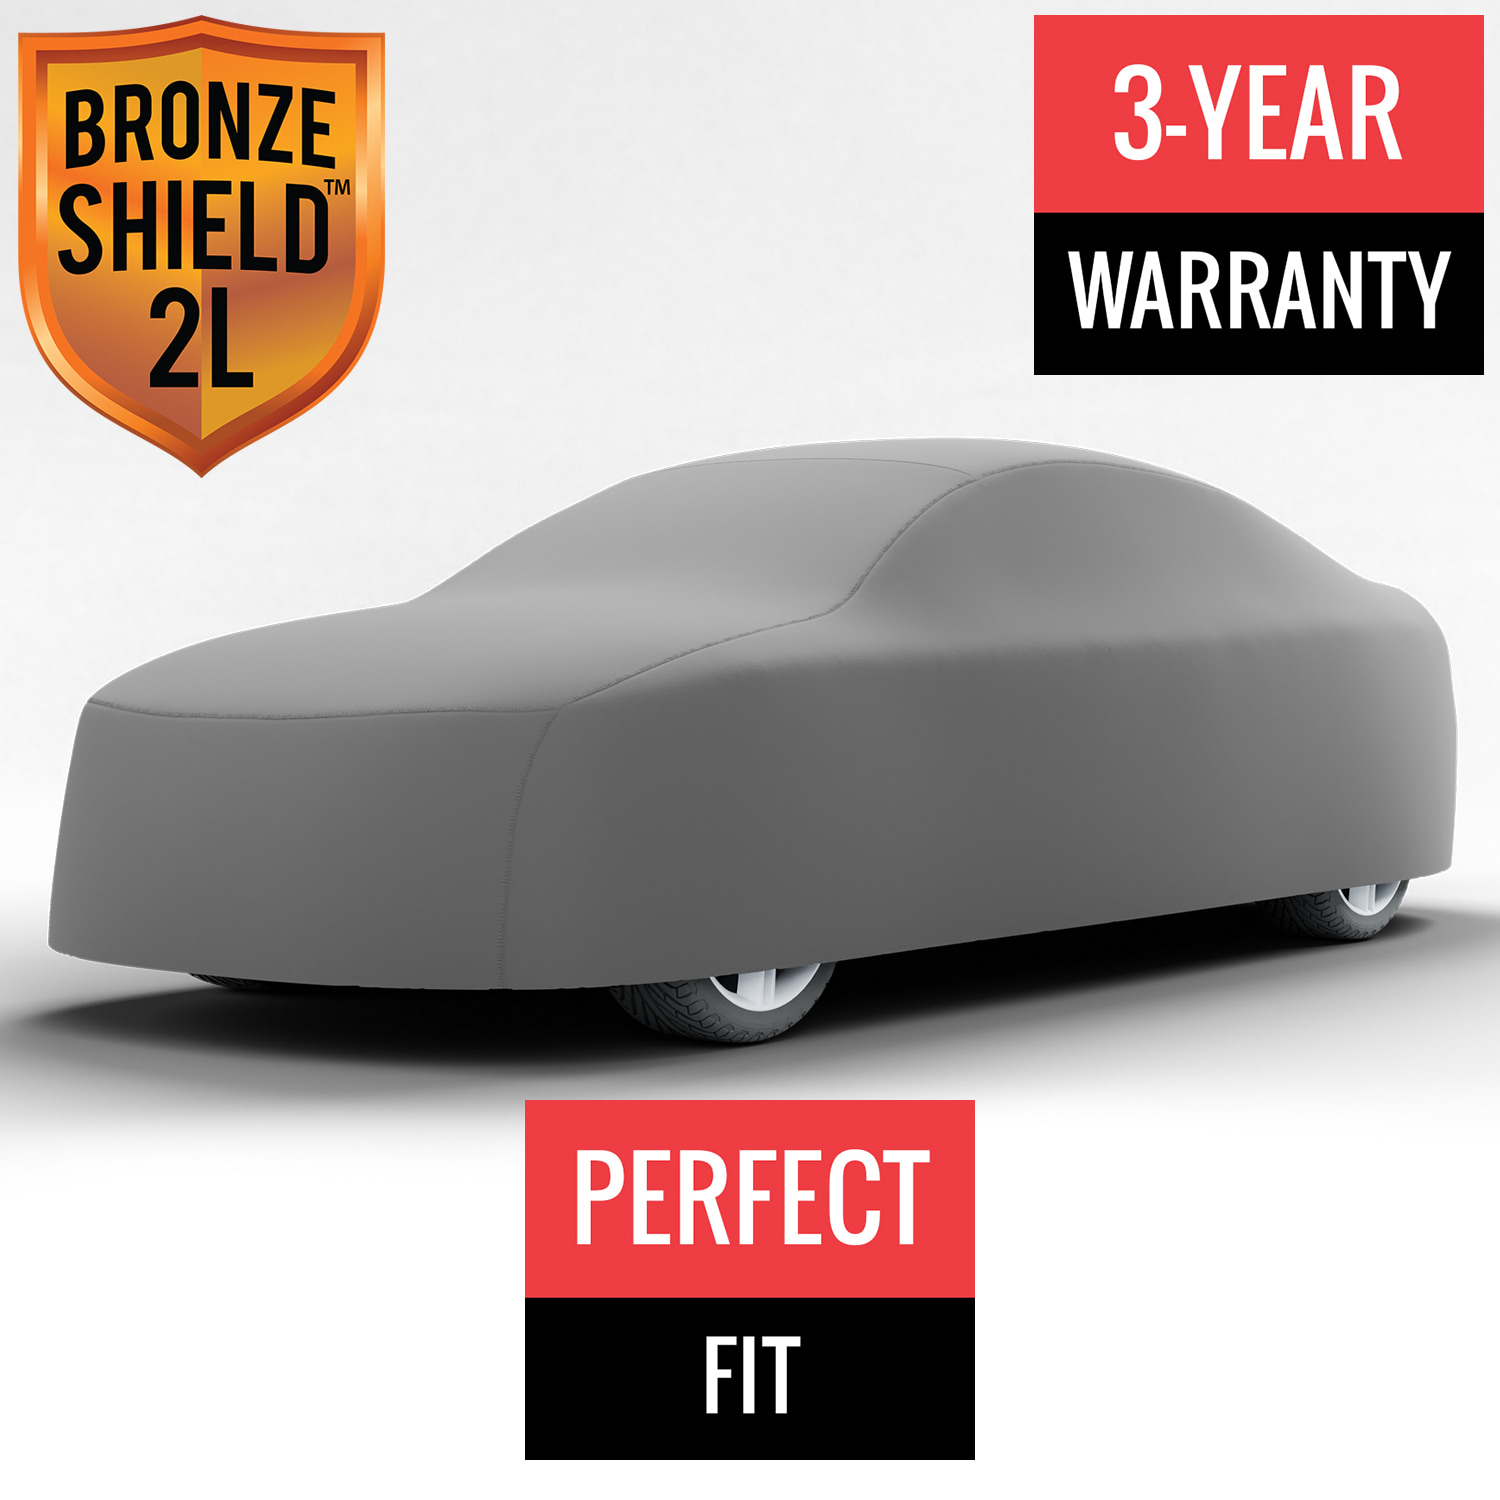 Bronze Shield 2L - Car Cover for Oldsmobile 98 1953 Convertible 2-Door